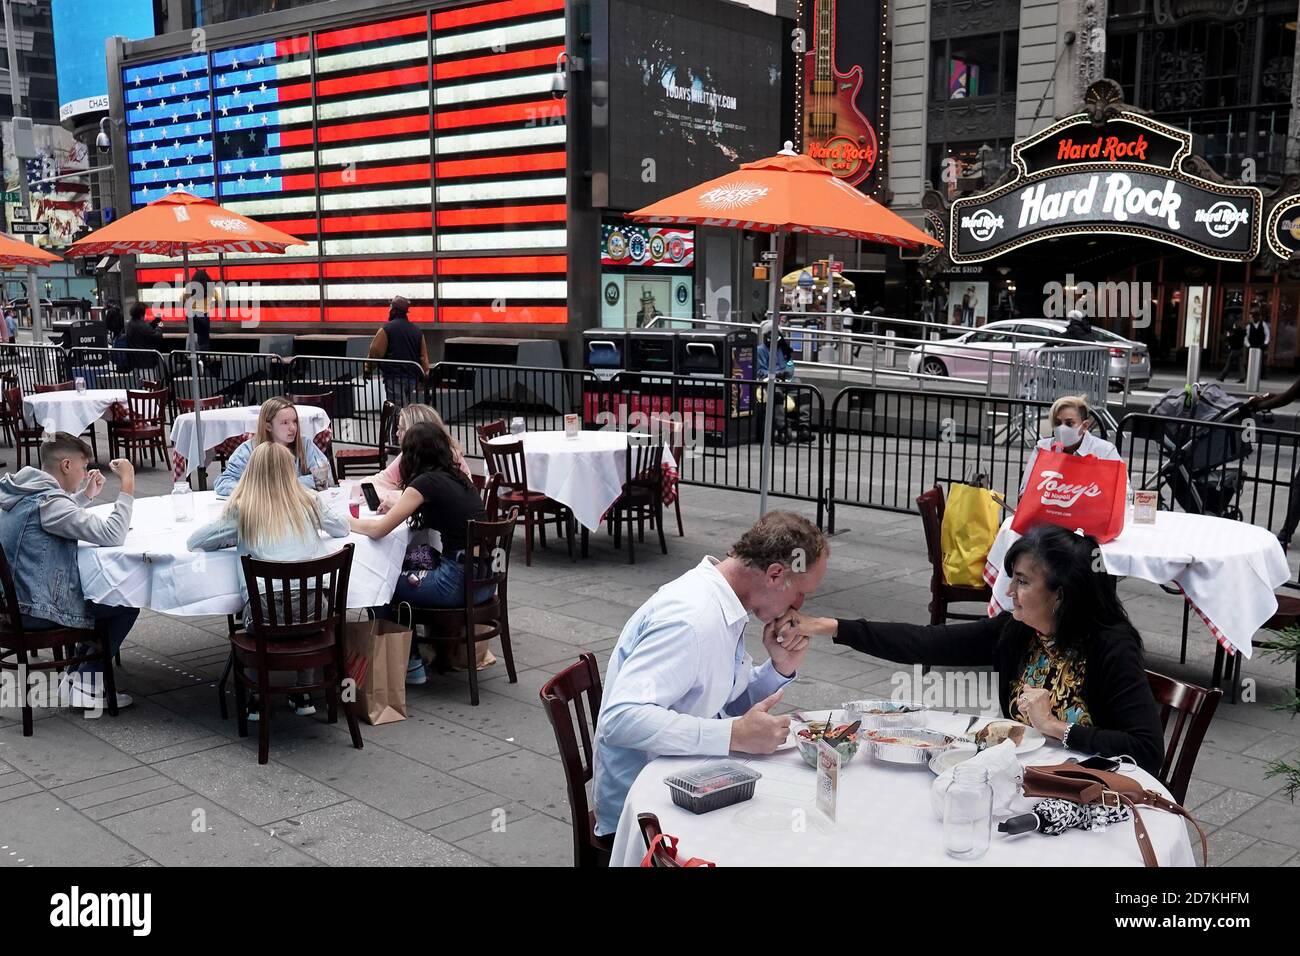 A man kisses a woman's hand after saying grace before dining outside at a pop up restaurant set up in Times for 'Taste of Times Square Week' during the coronavirus disease (